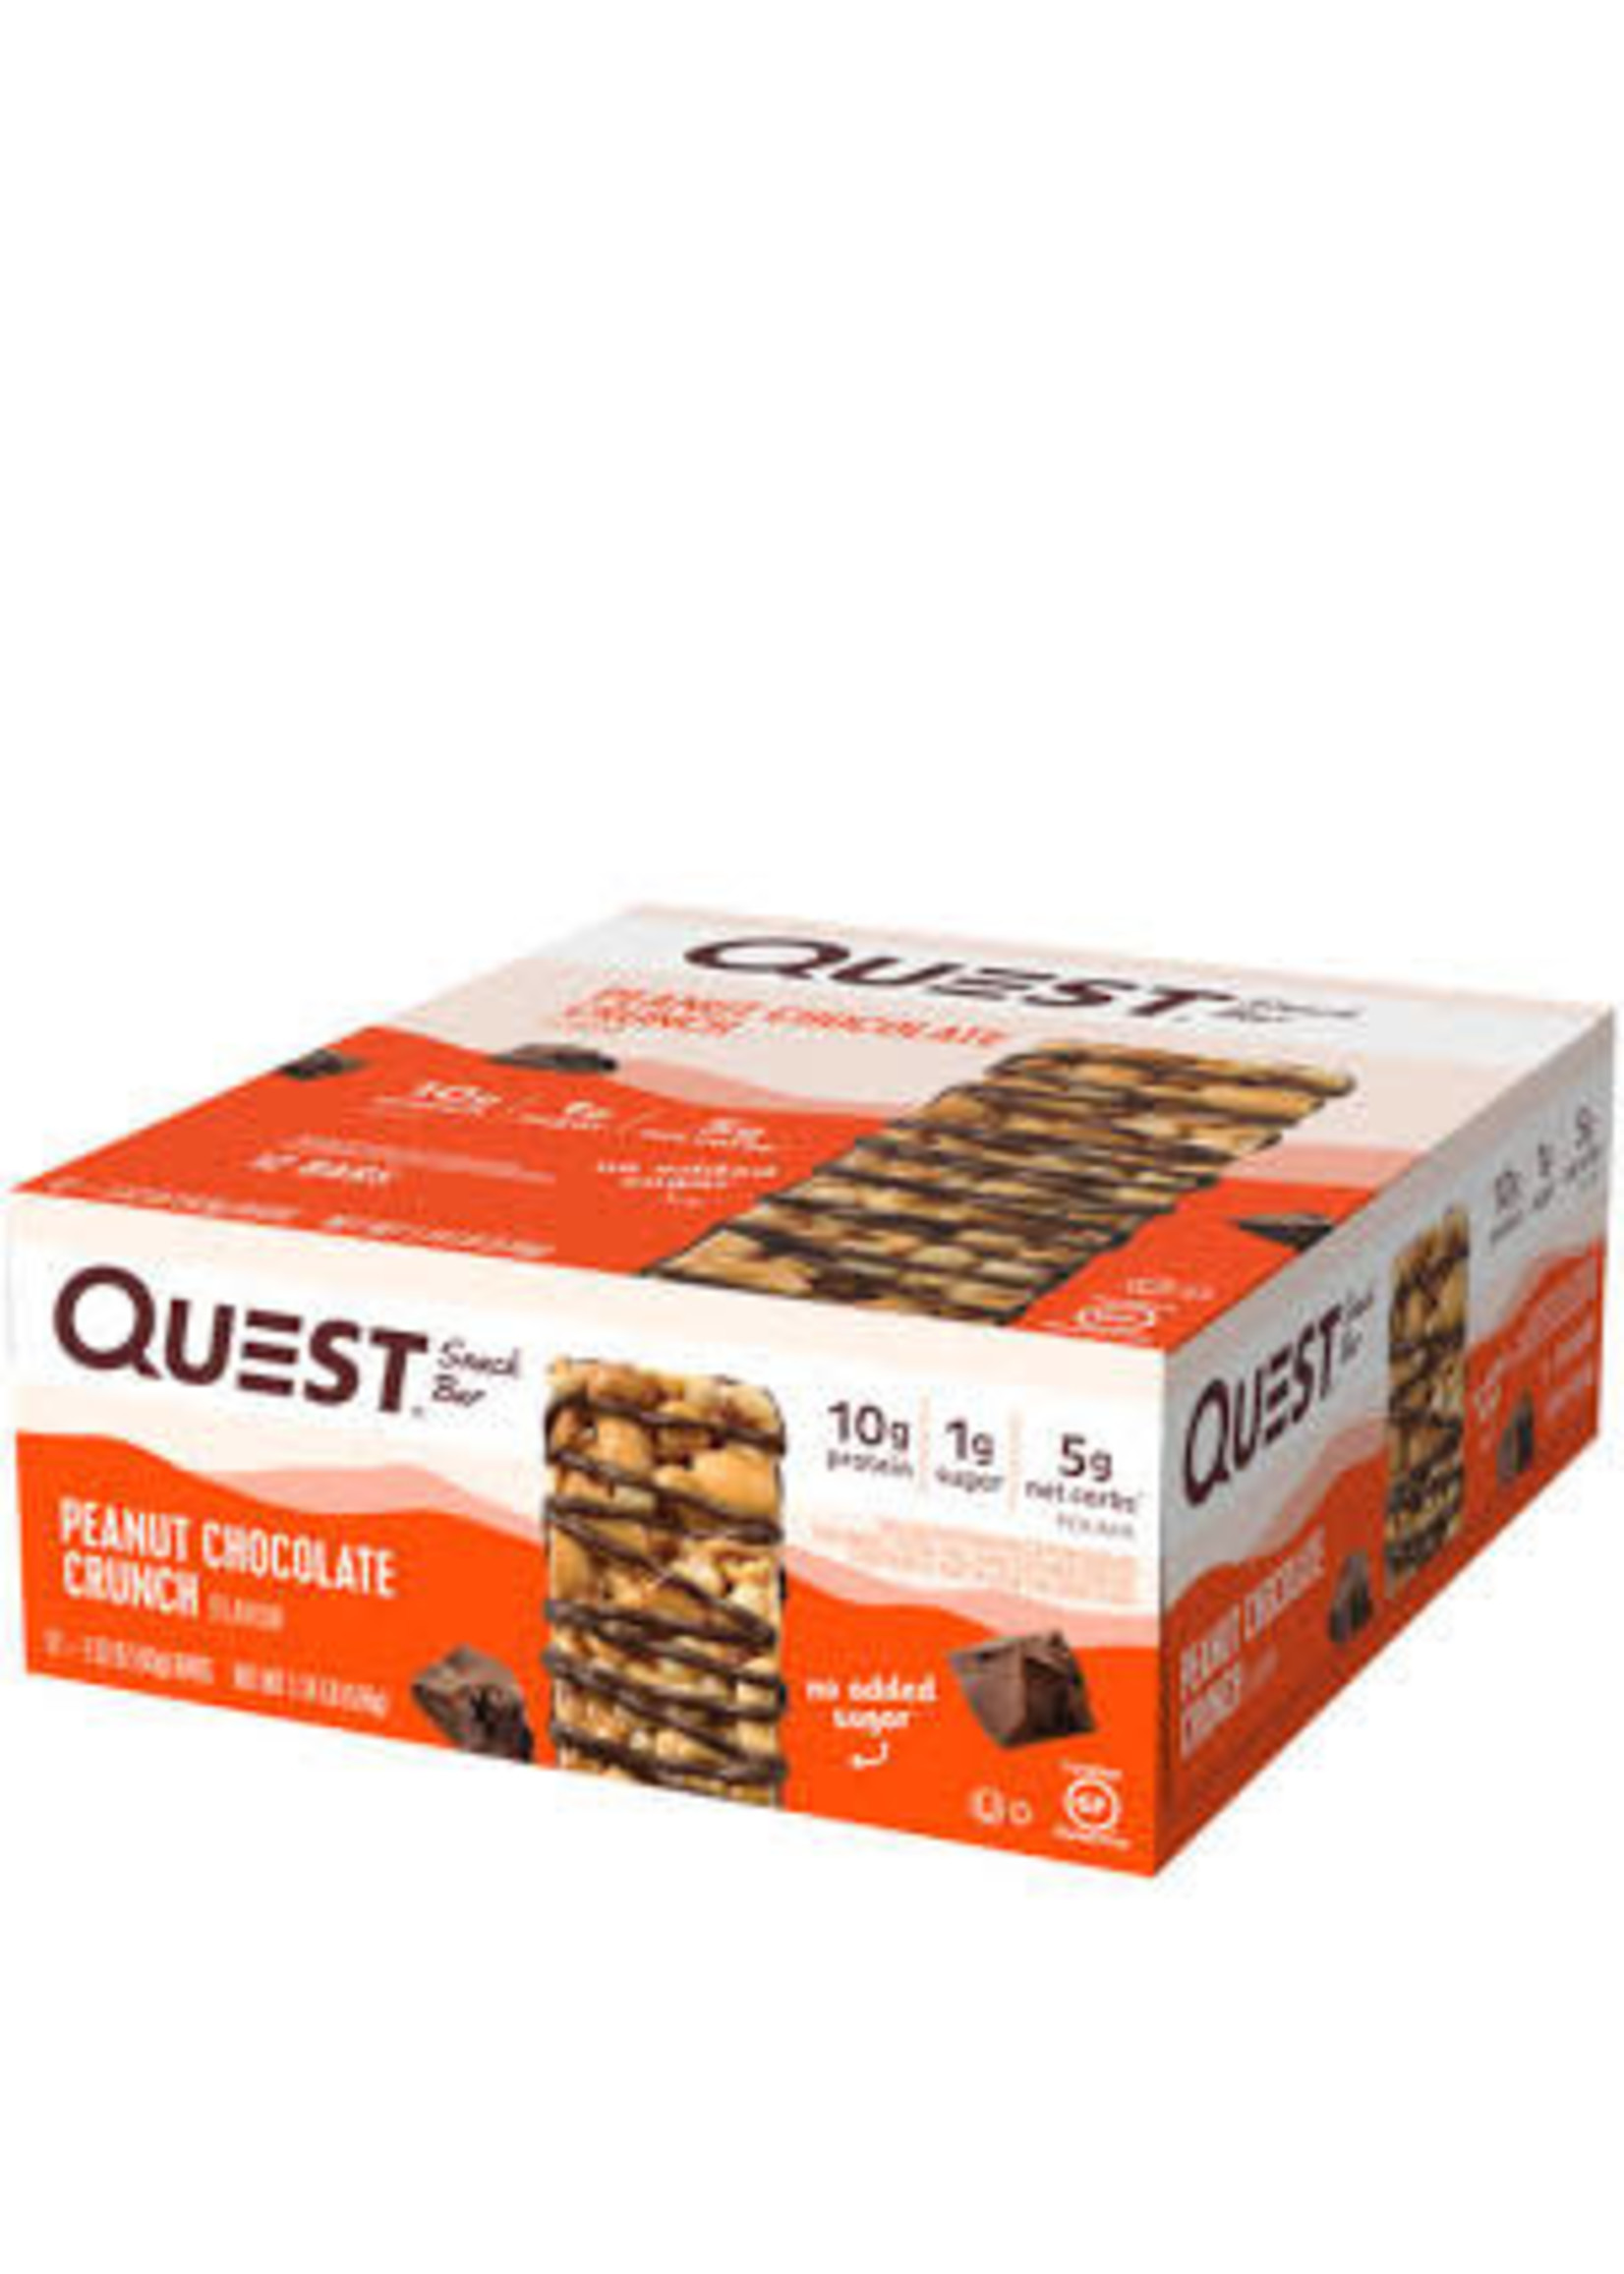 Quest Nutrition Quest - Snack Bars, Peanut Chocolate Crunch